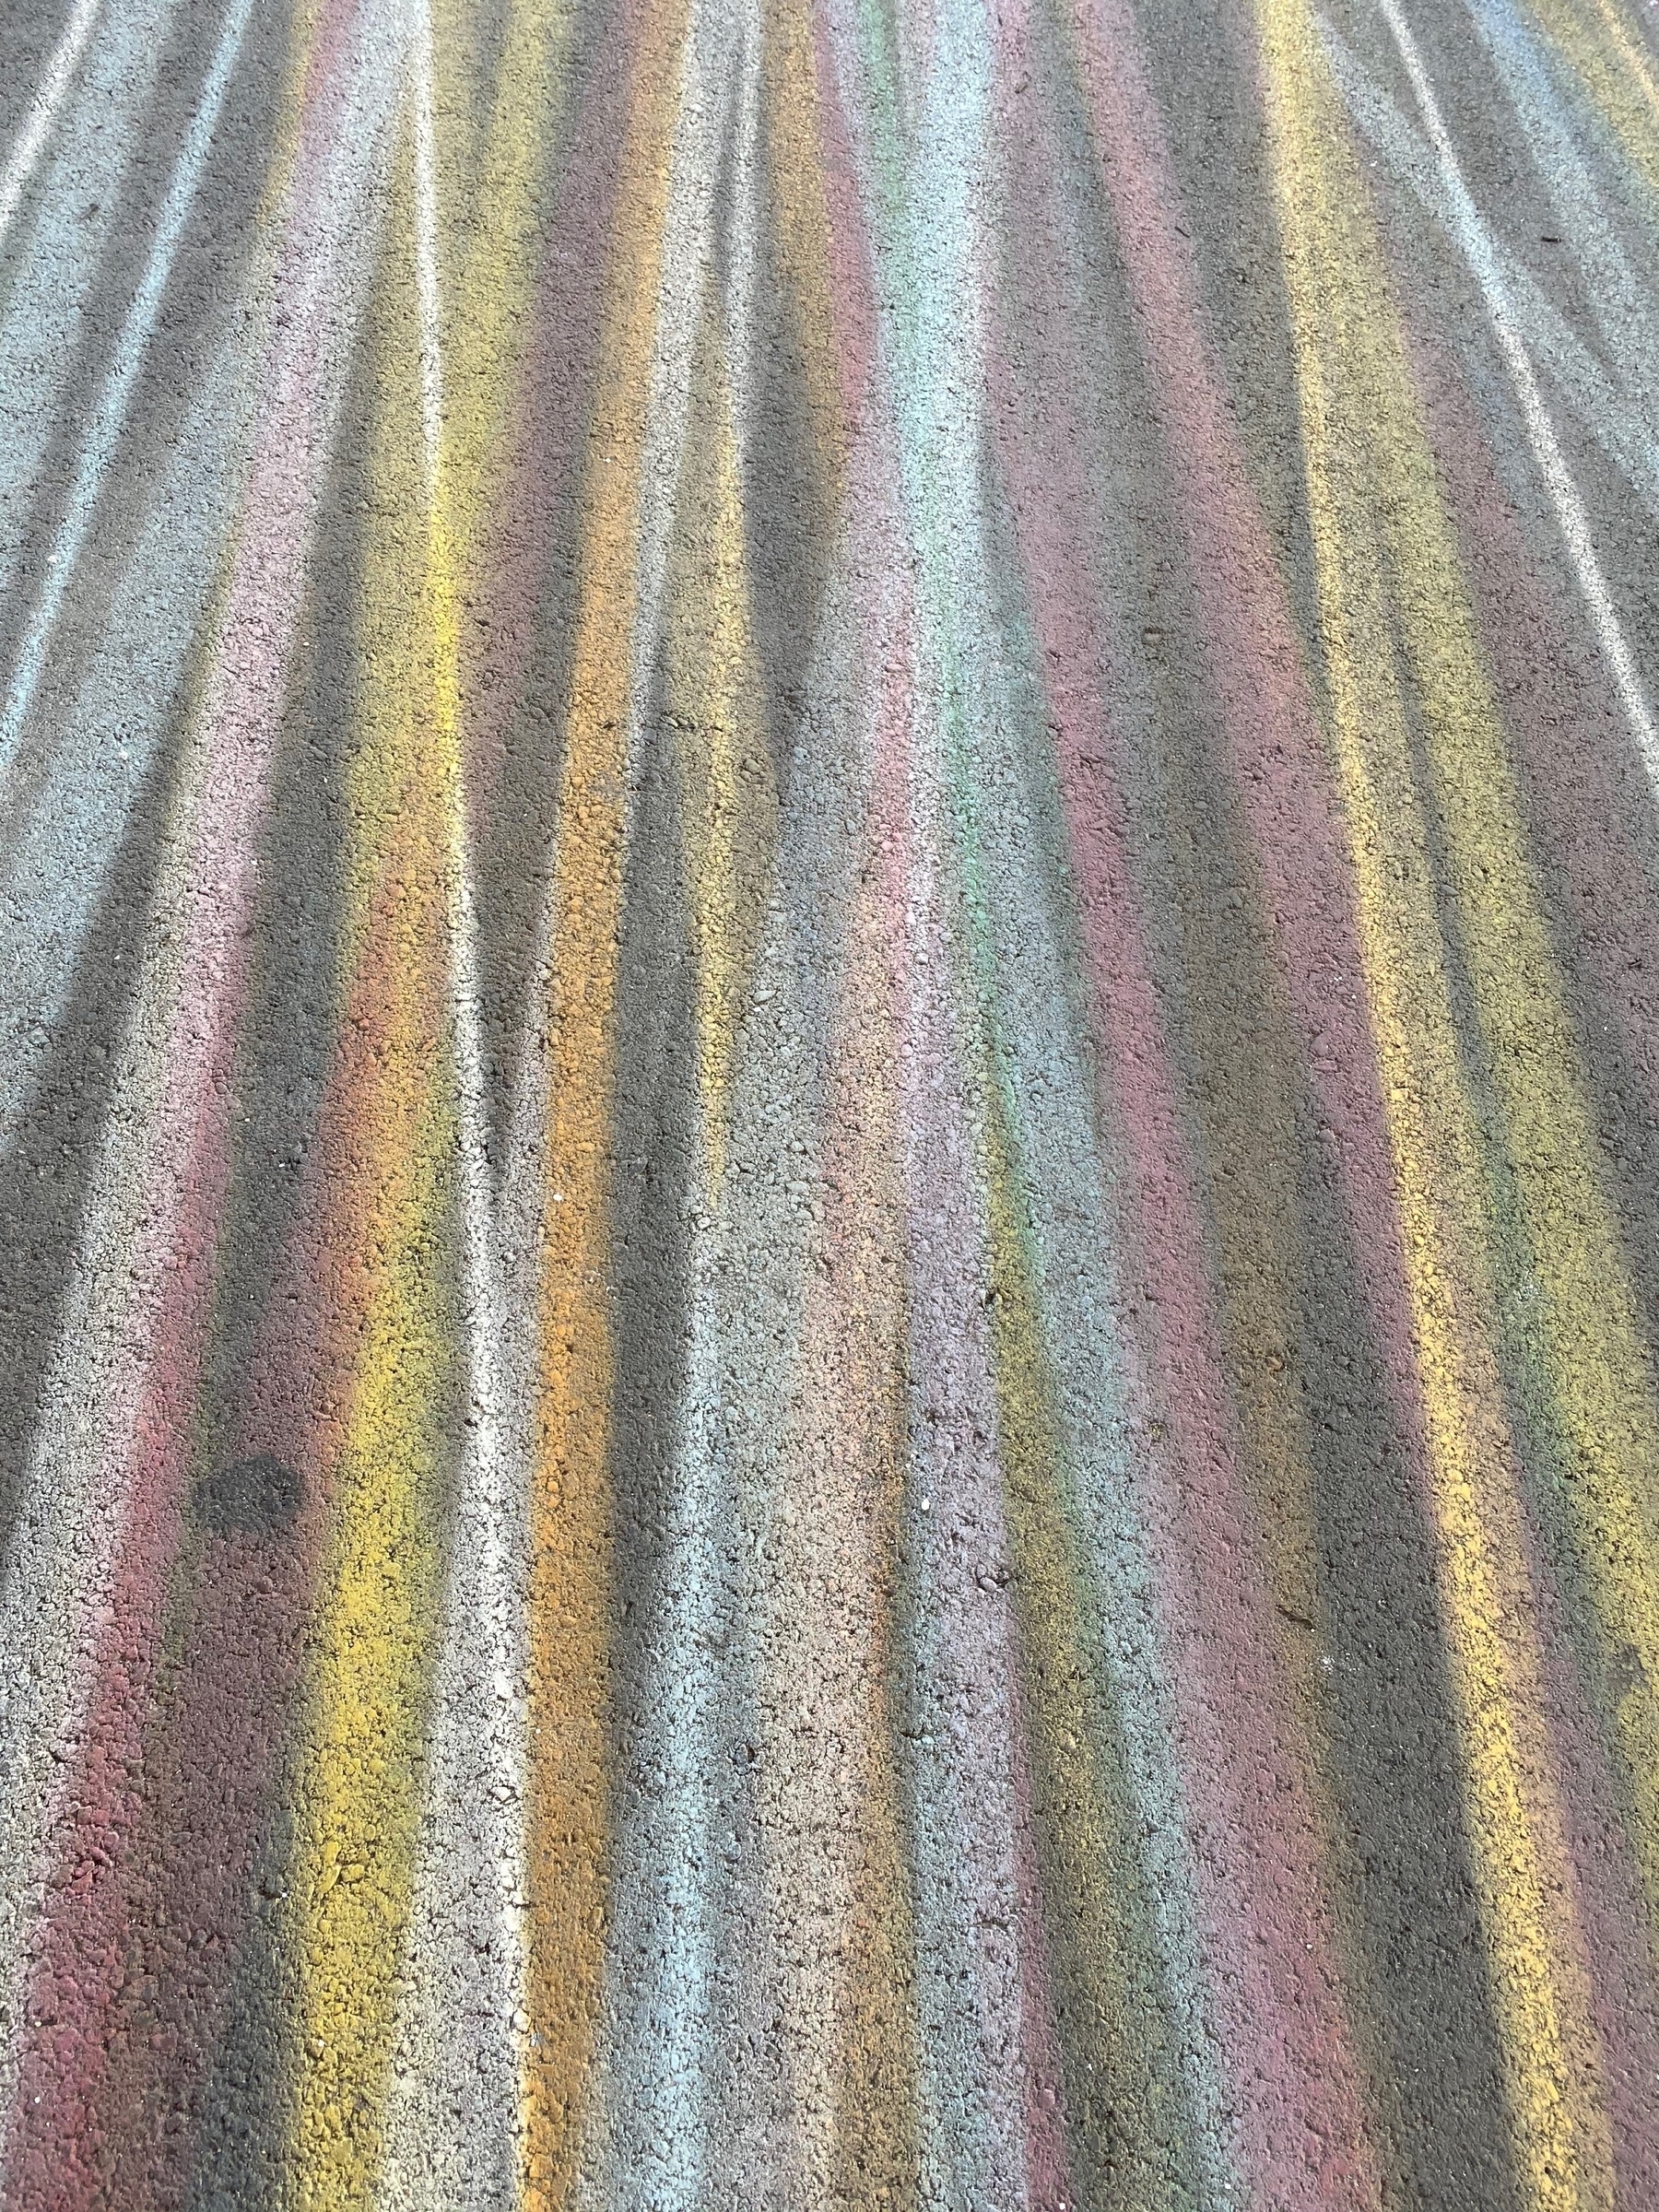 Chalk like pastel lines running from top to bottom.